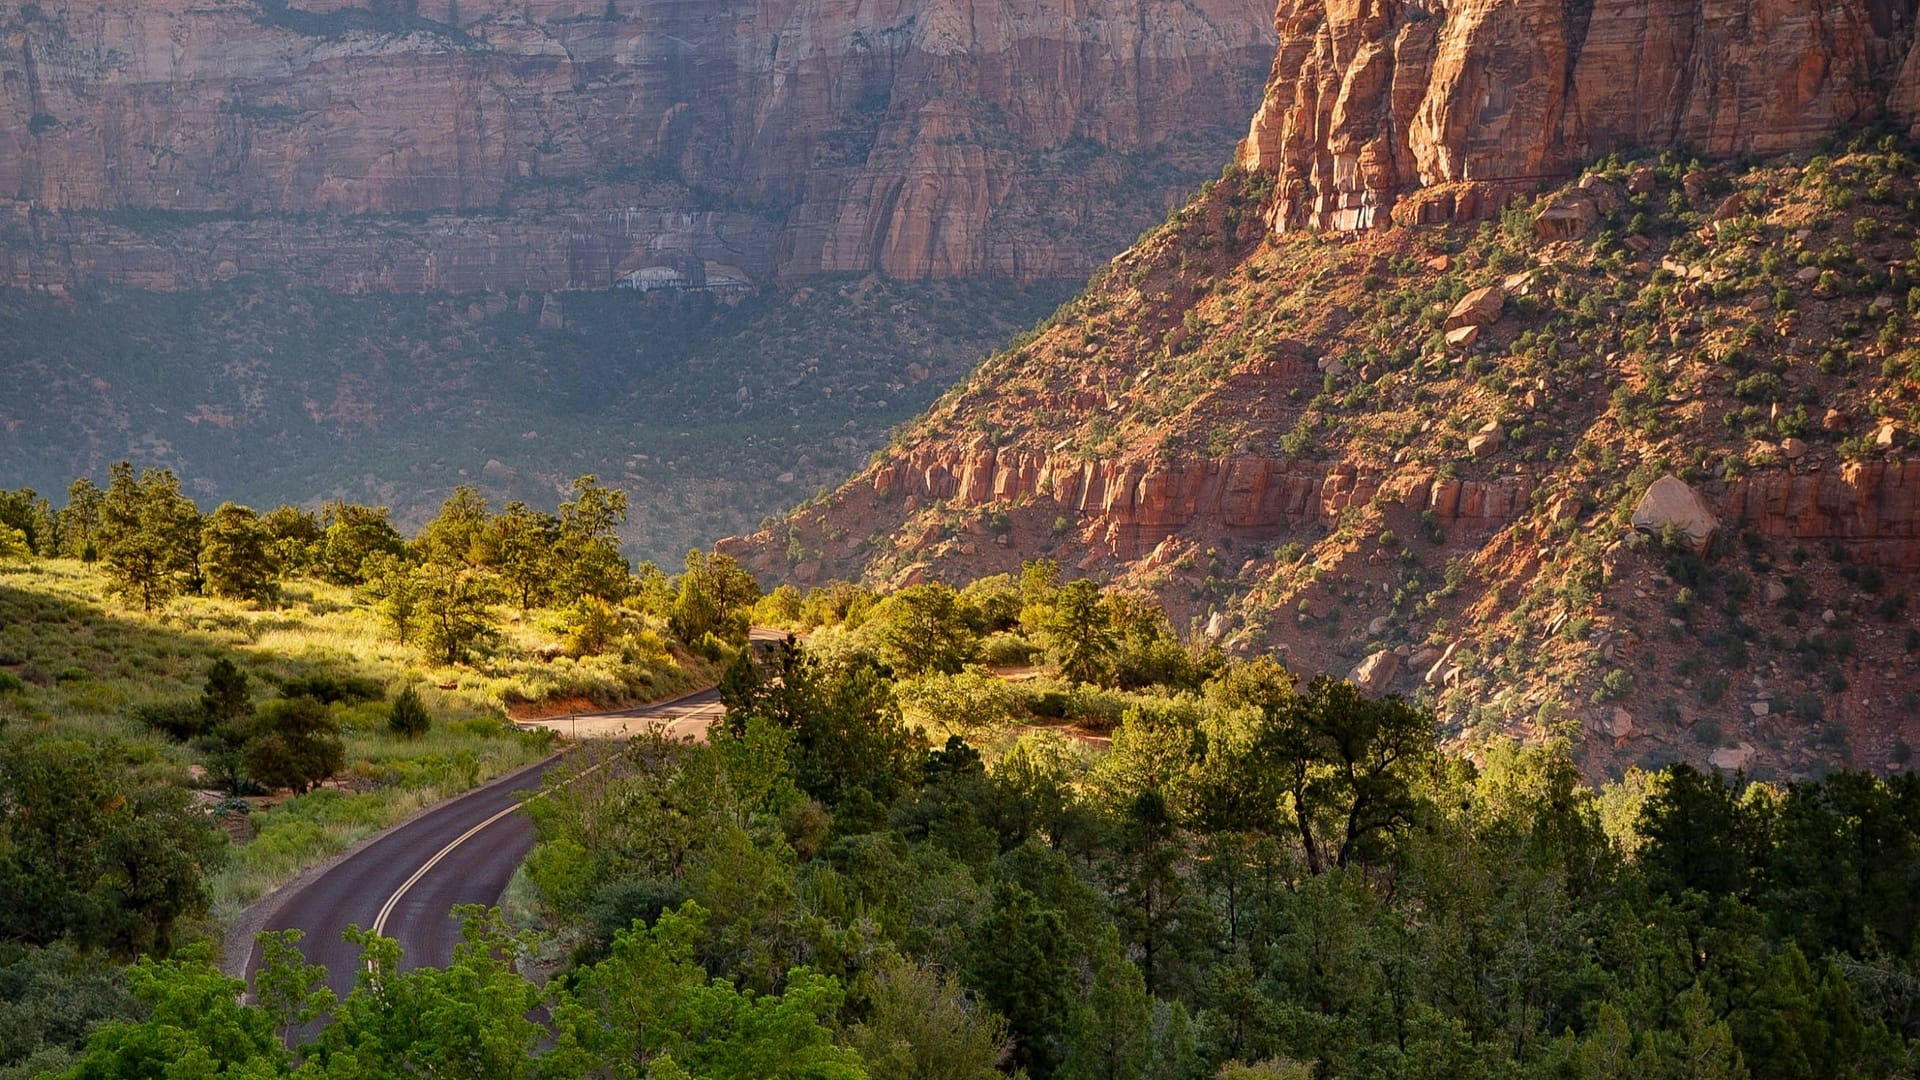 An empty curvy road going through a beautiful section of Zion National Park with lots of green vegetation and red rock formations. Photo by Feeltoep